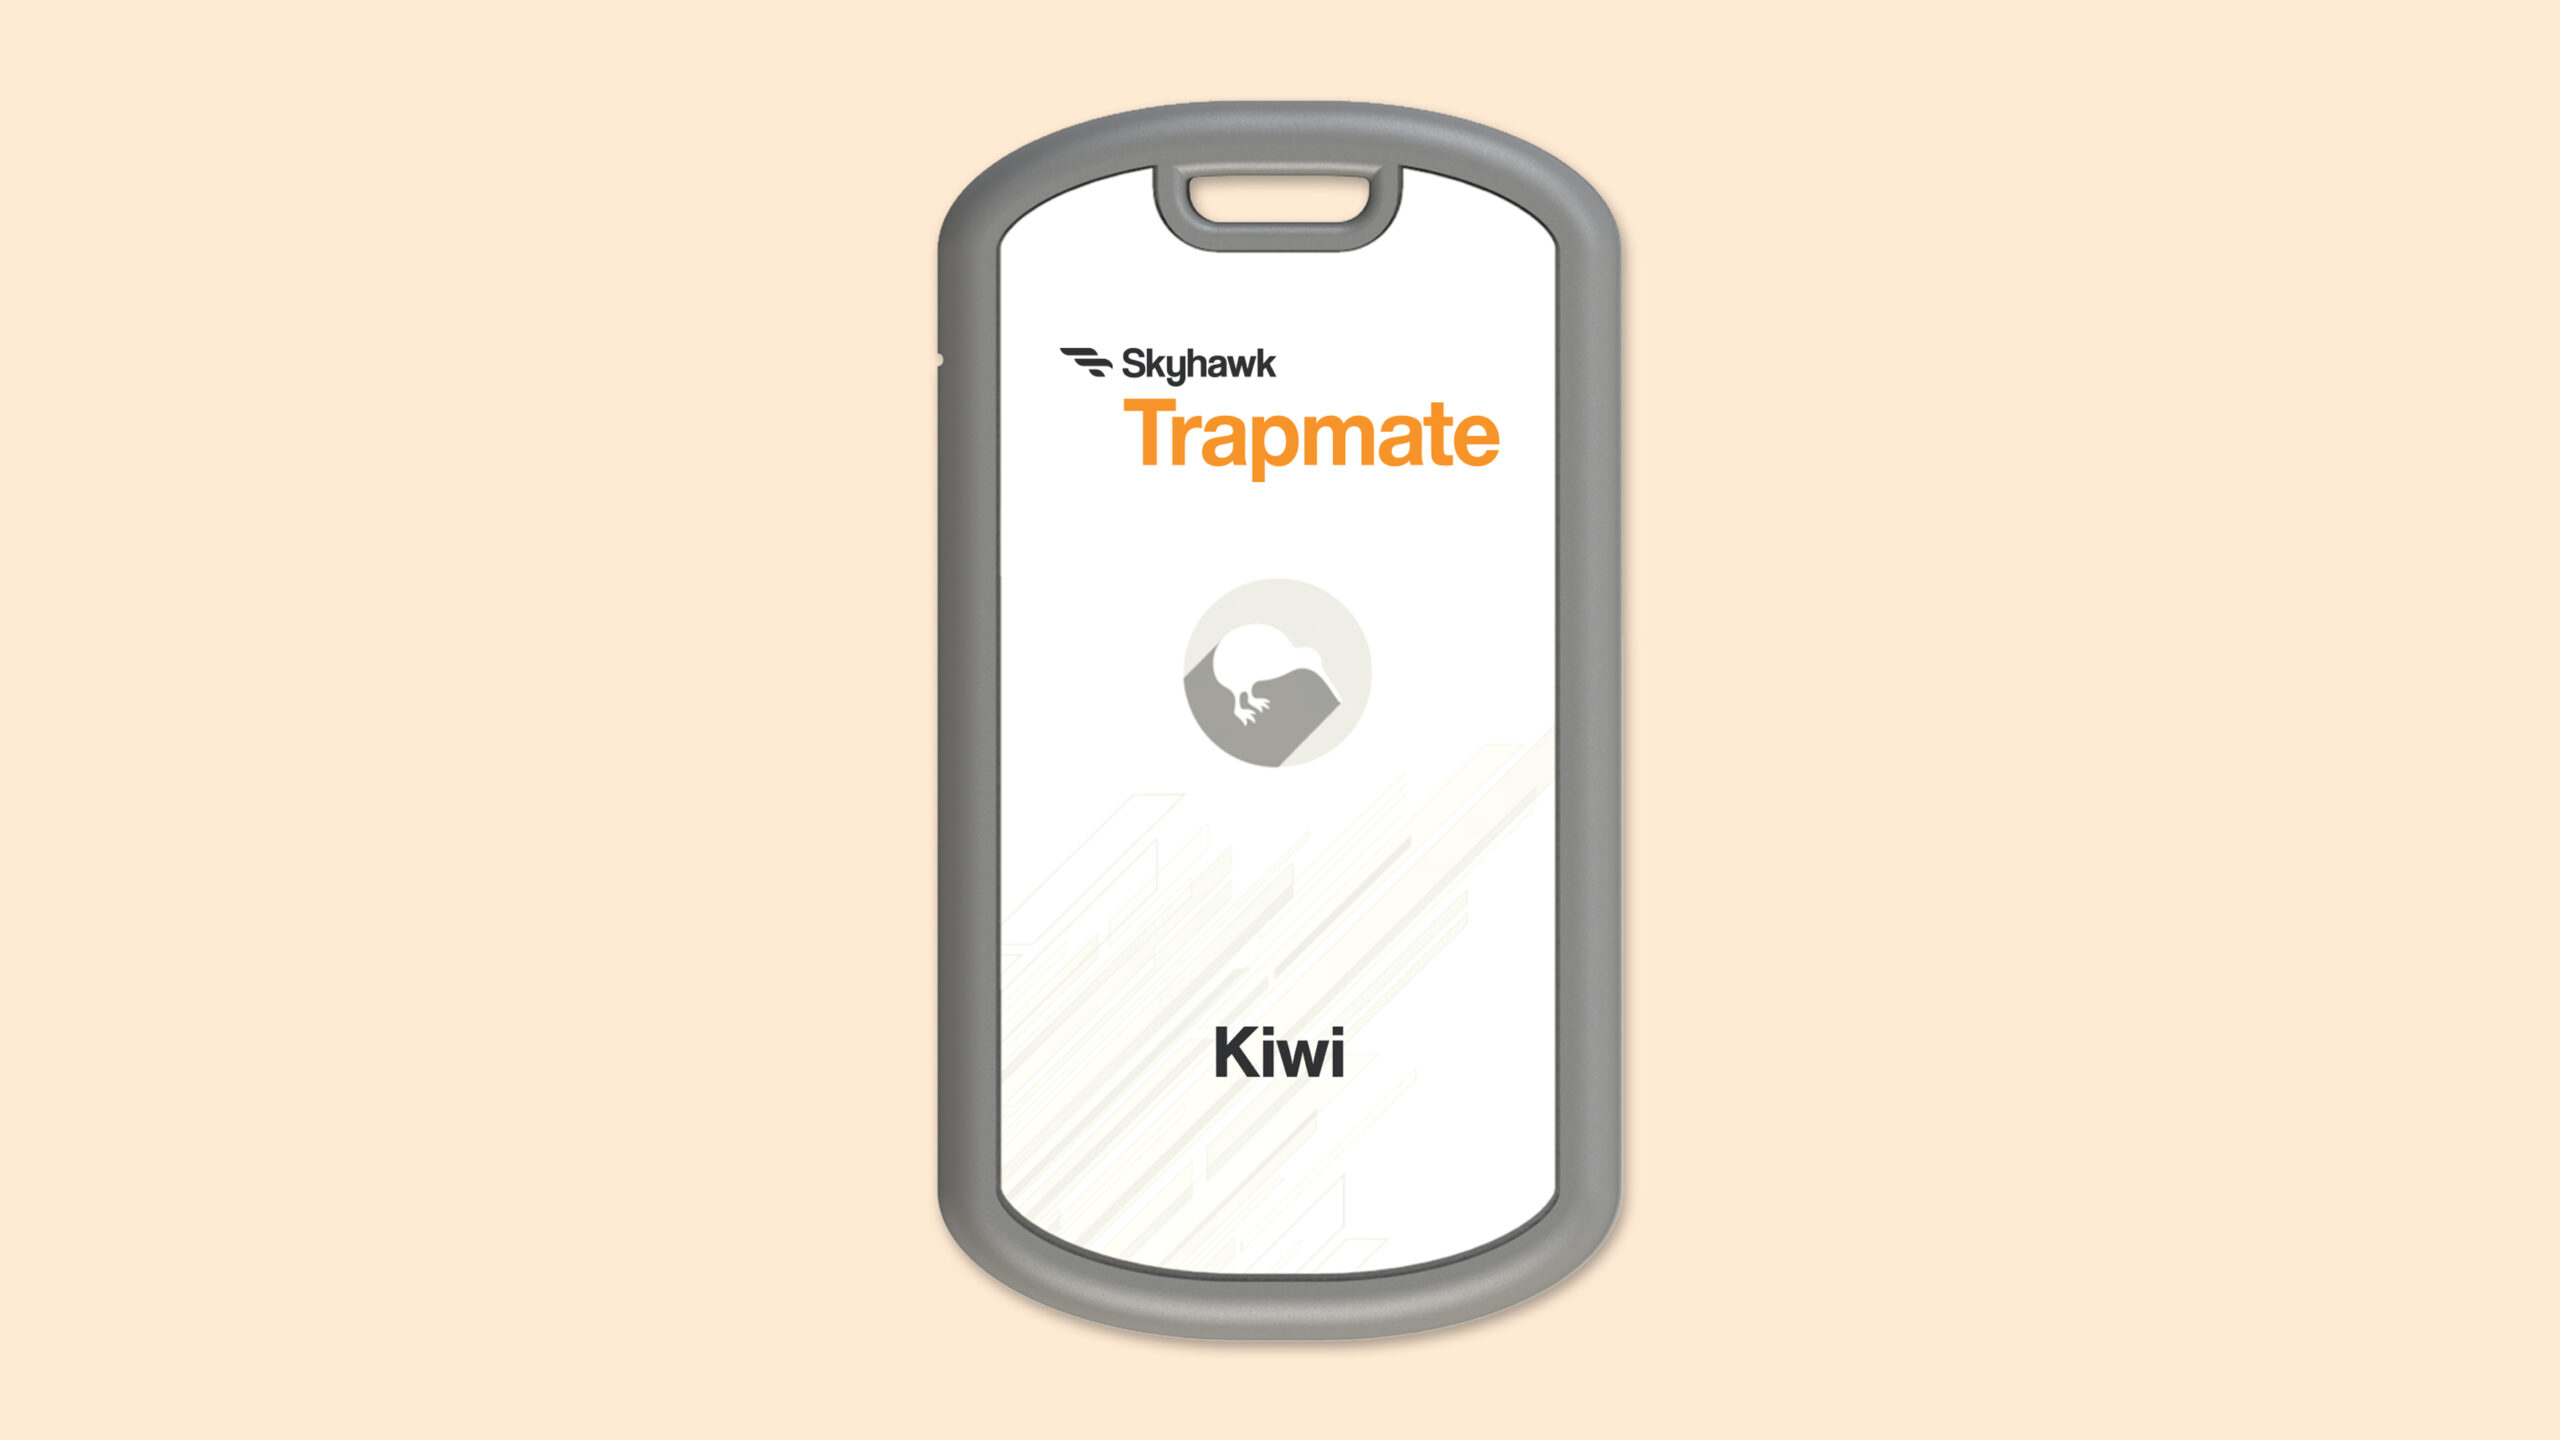 The Trapmate Kiwi combines two different sensors and a direct cellular connection to create the ultimate single-trap ERM device